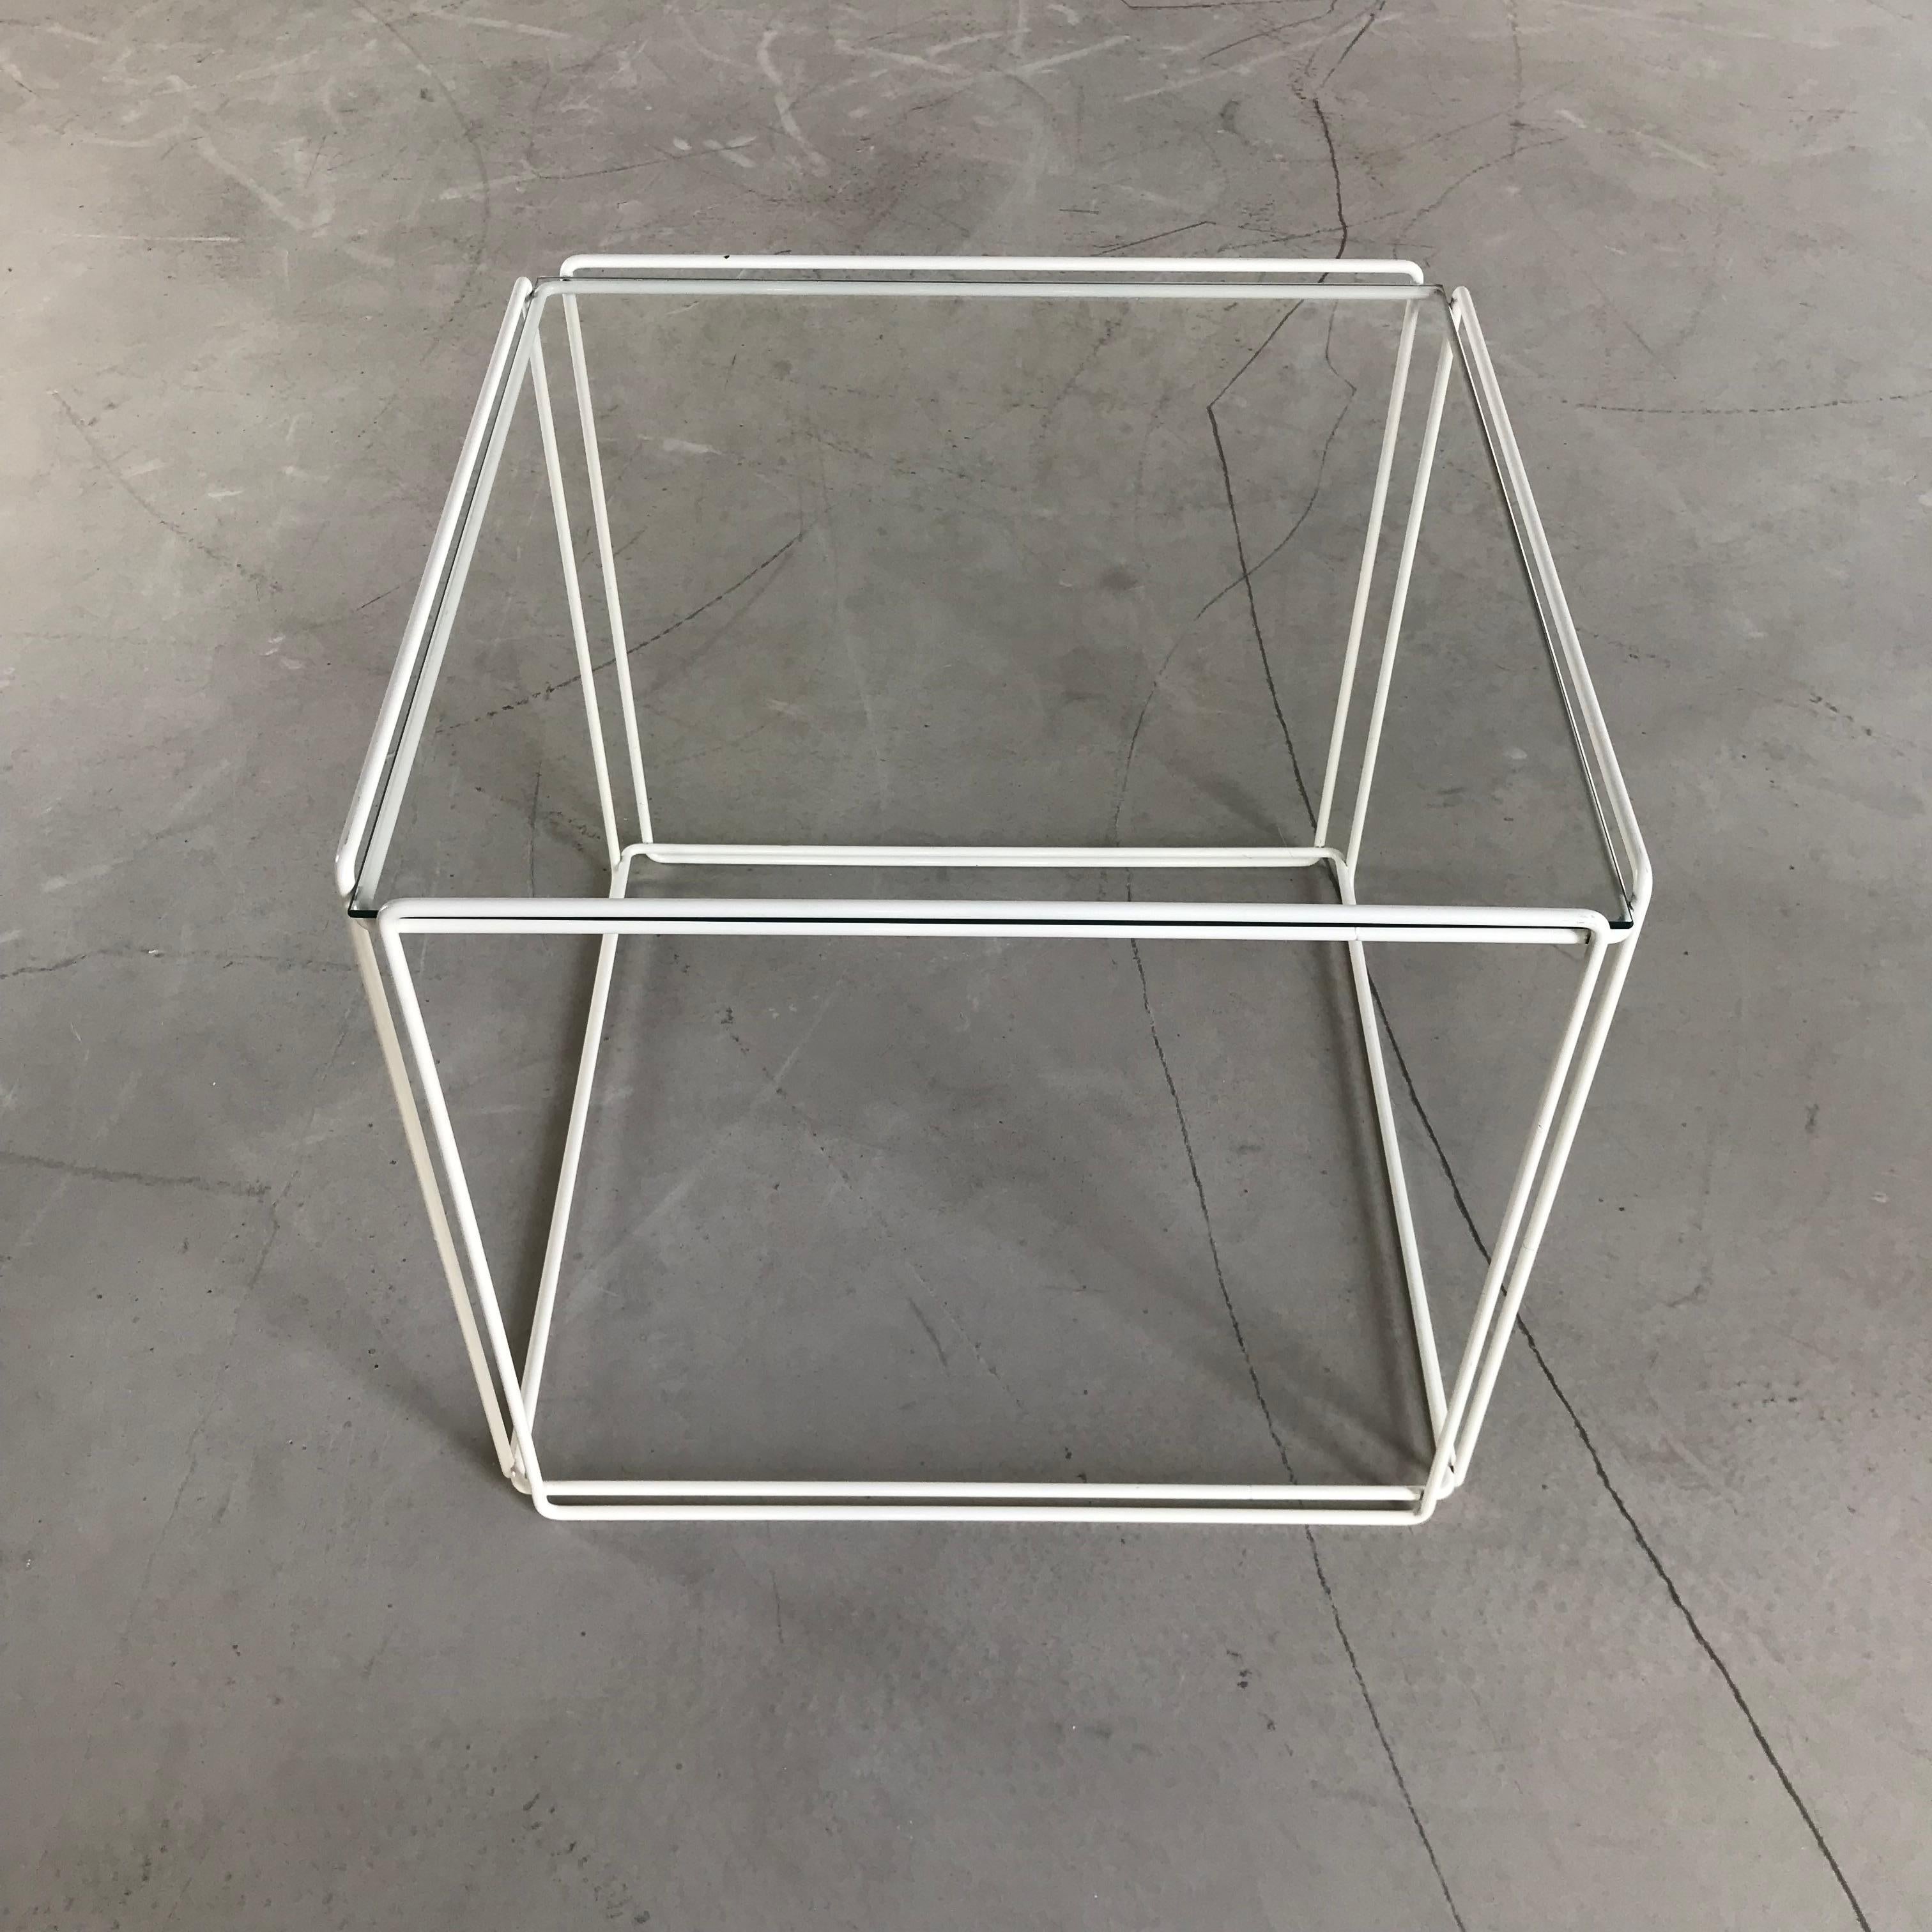 Beautiful, graphical and Minimalist design by Max Sauze for Max Sauze Studio, circa 1970. This table features a white colored metal base and a glass 'shelve'. The glass and metal wire structure gives this table a very transparent, minimal look, but